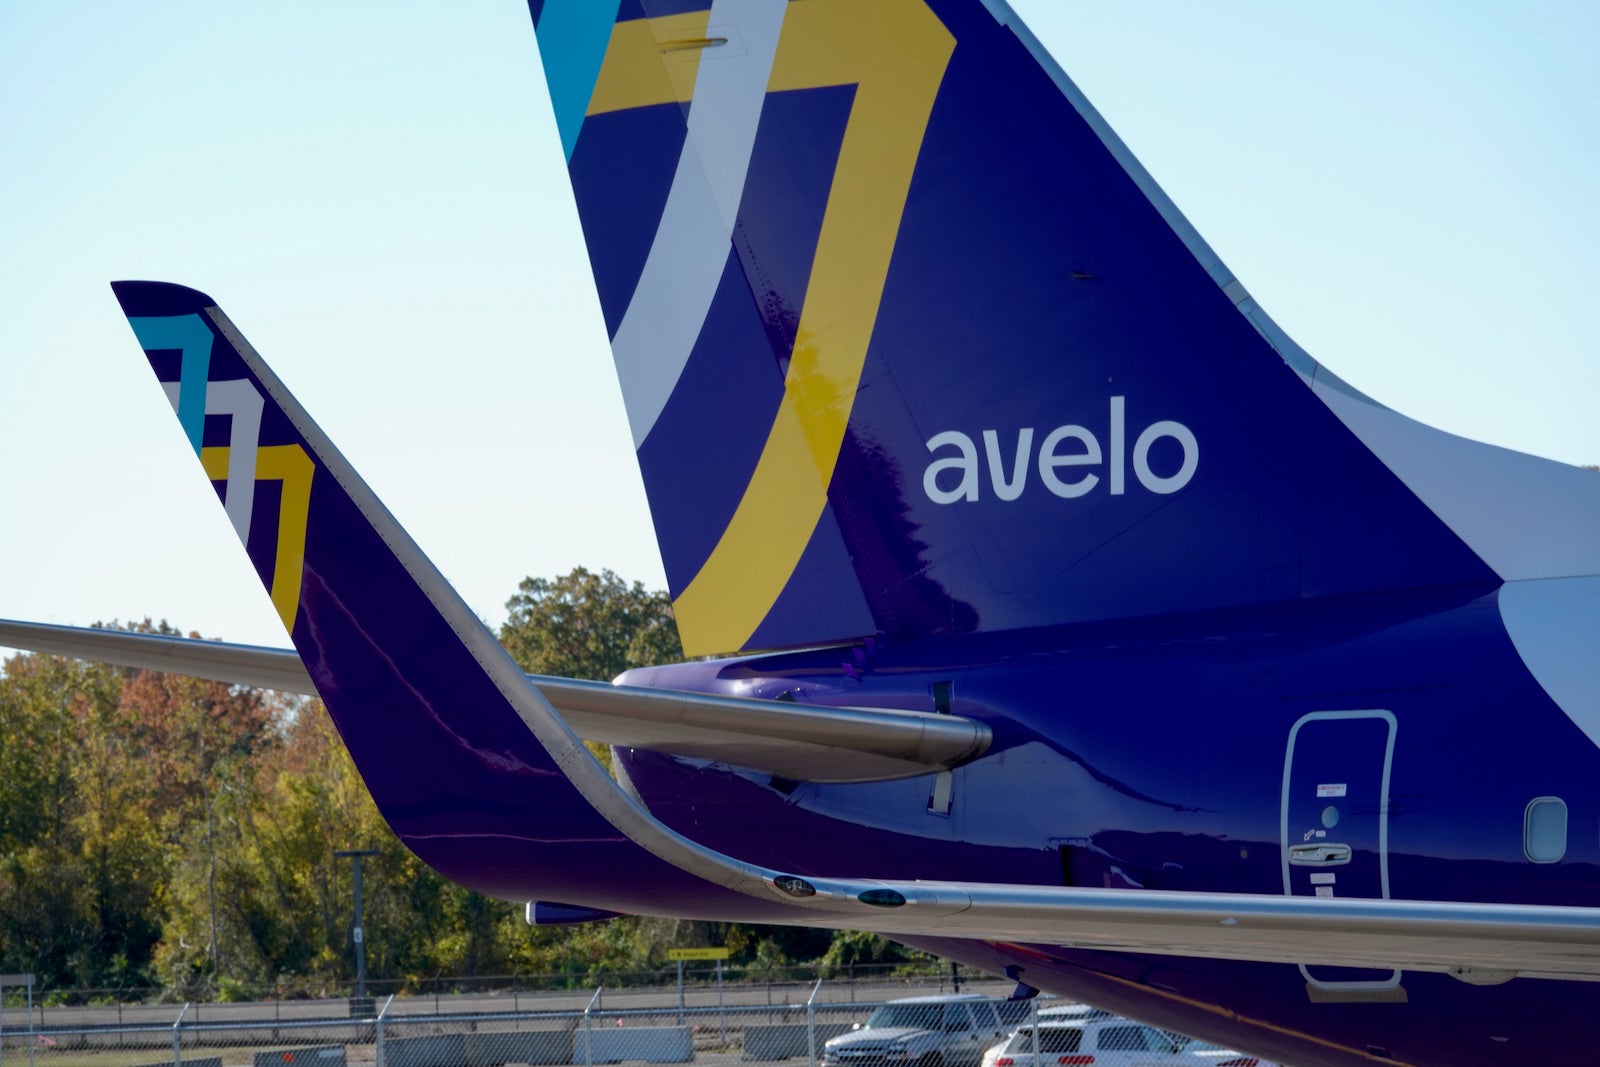 Budget carrier Avelo gives Florida's tiny Lakeland airport its first commercial airline service in 12 years